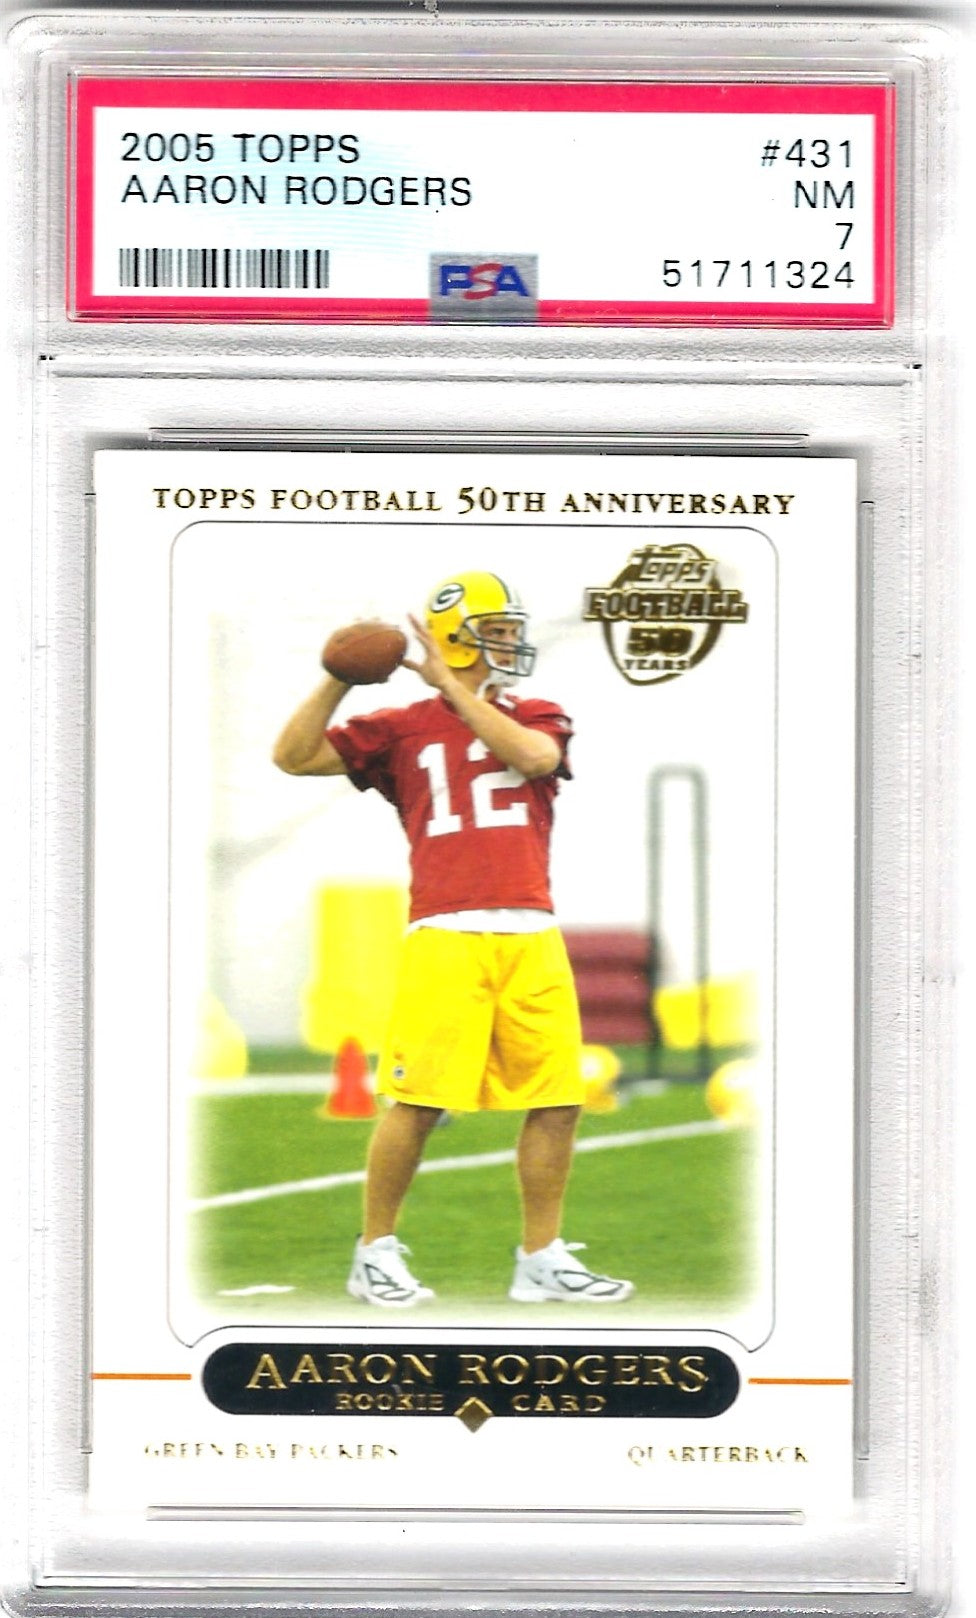 AARON RODGERS ROOKIE CARD - TOPPS #431 - PSA 7